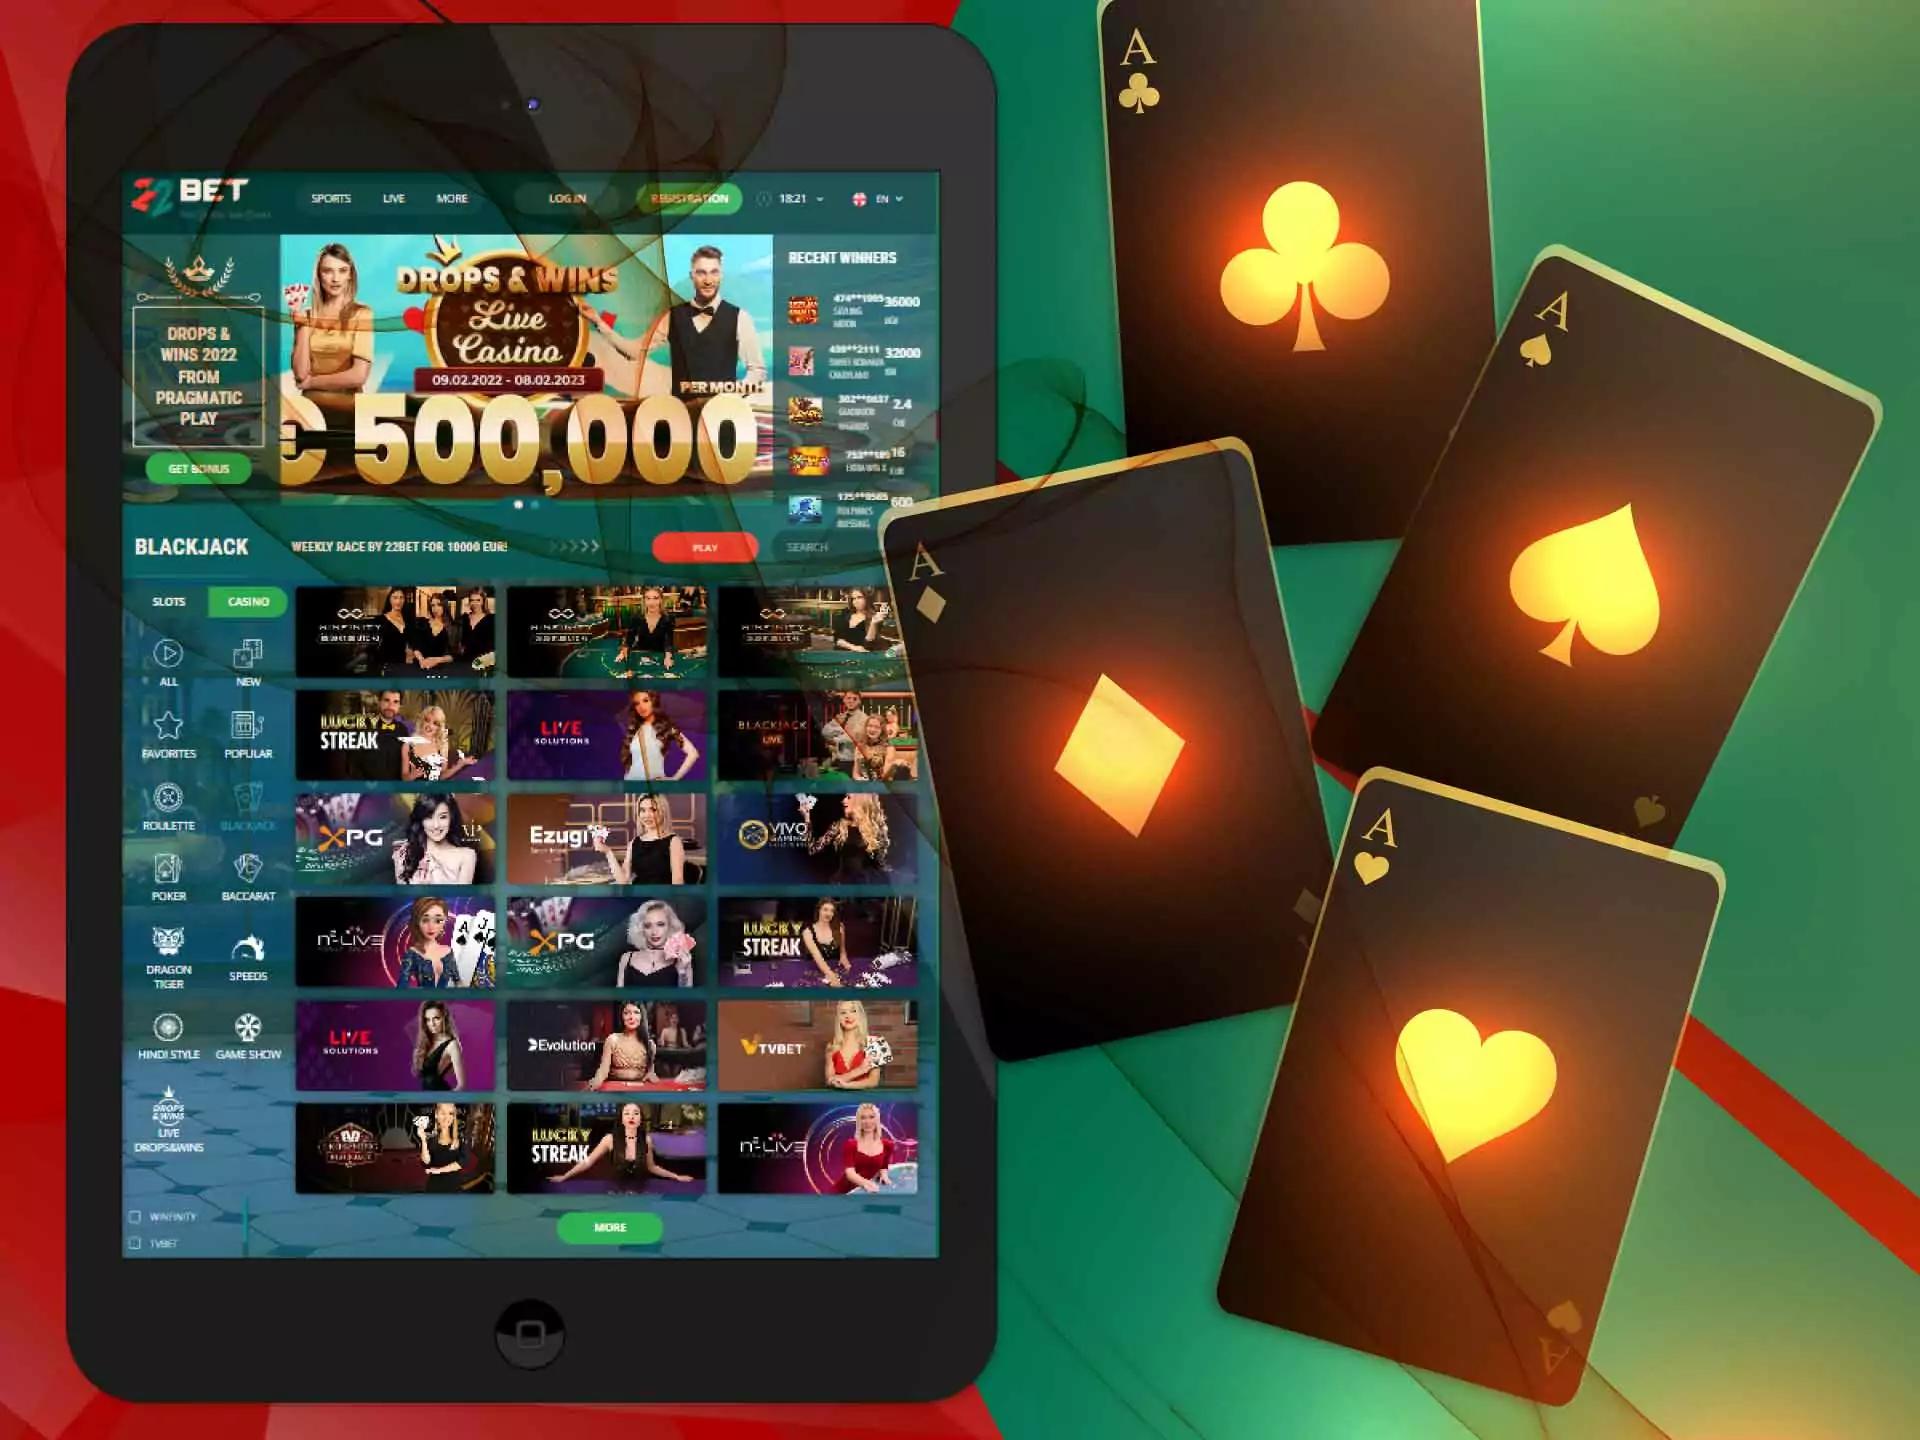 There are various blackjack games in the 22Bet casino.